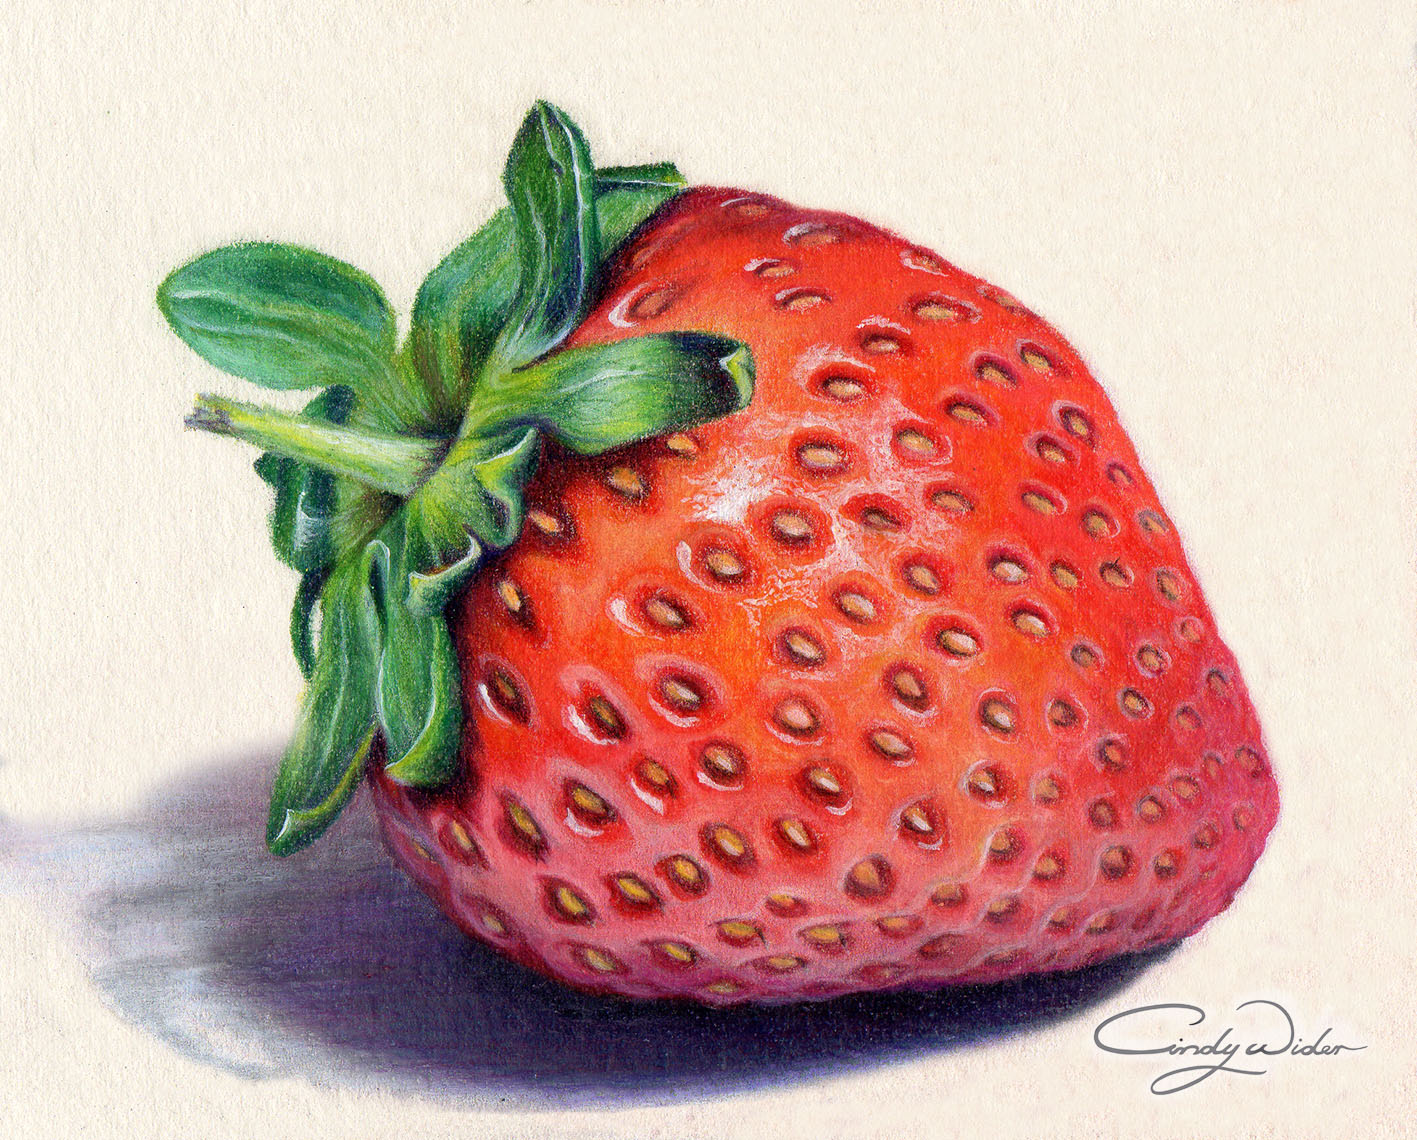 The Joy Of Colour Pencils The Complete Online Drawing Course By Cindy Wider